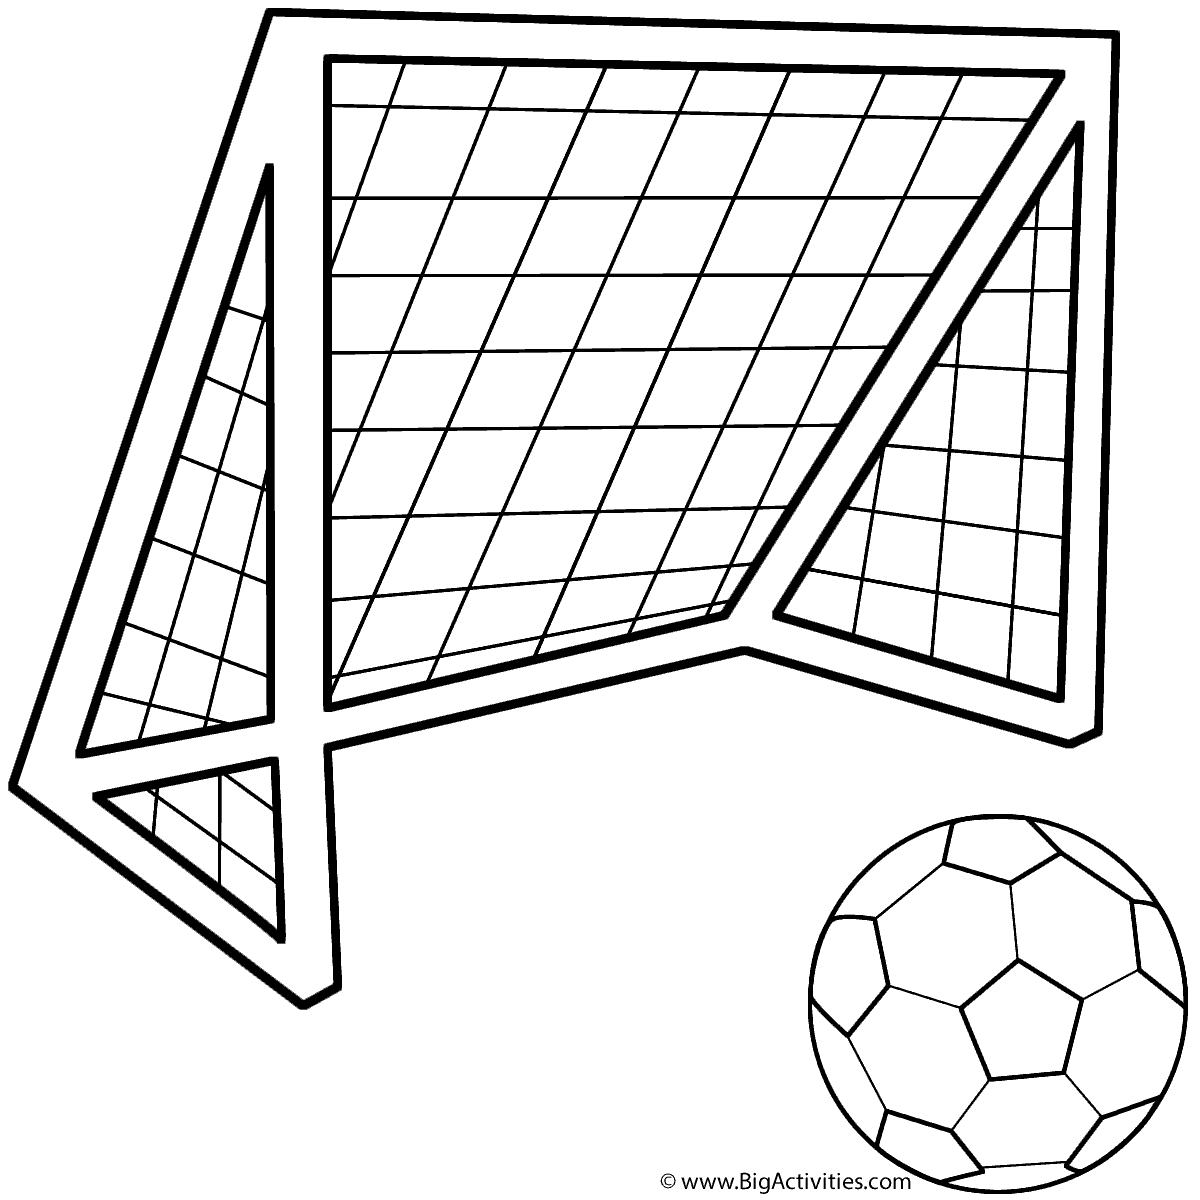 Soccer Ball with Soccer Net - Coloring Page (Father's Day)